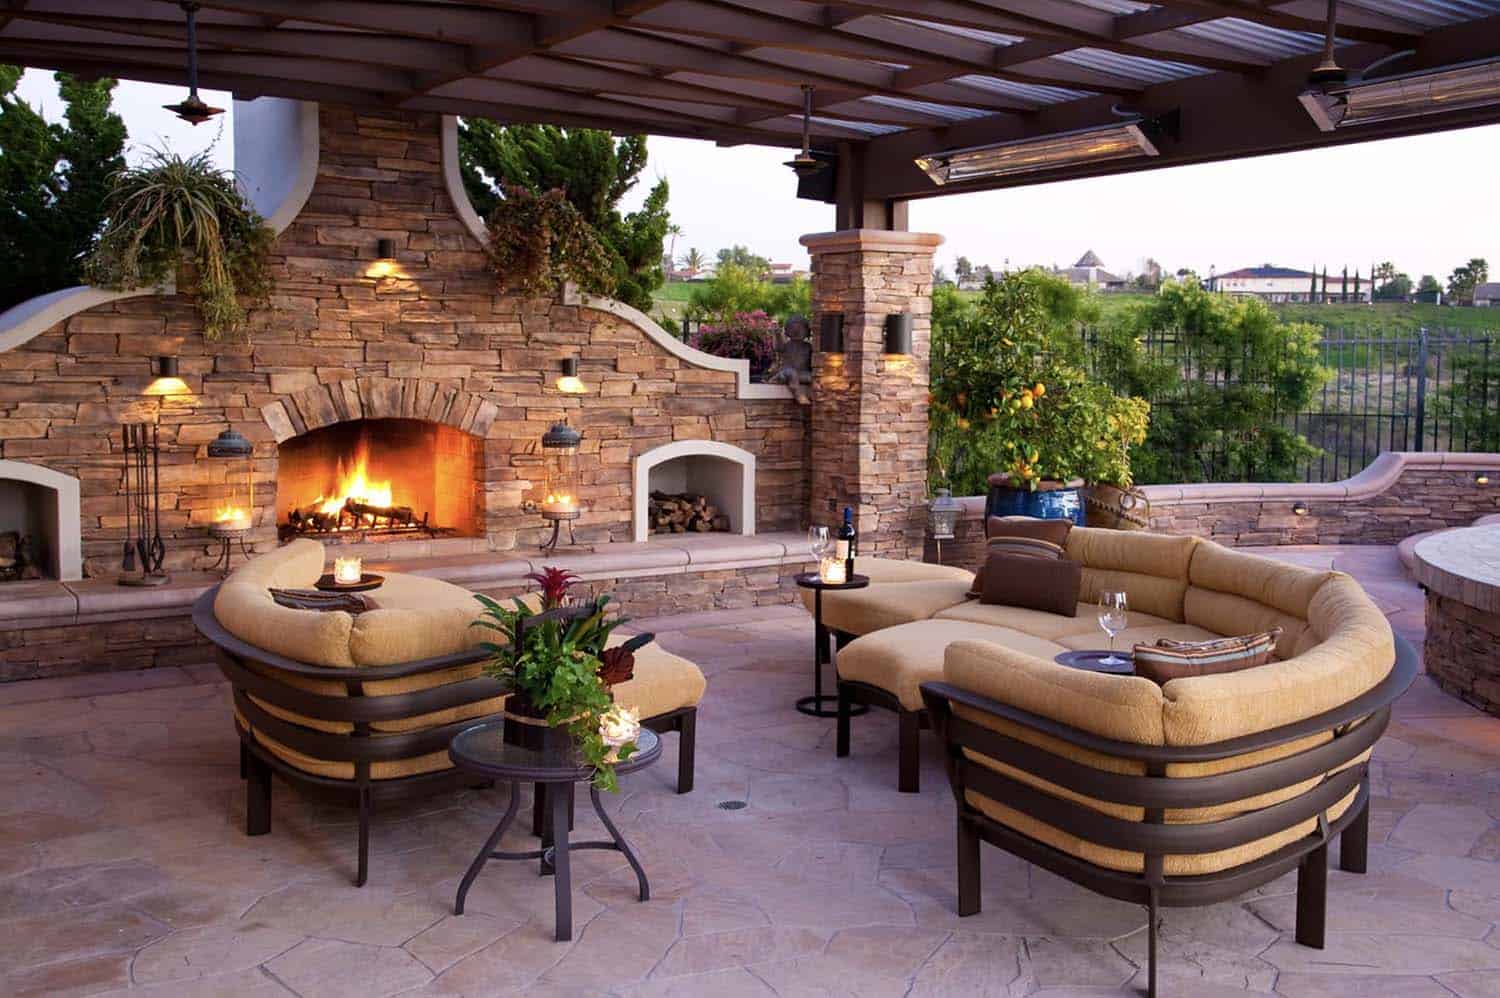 mediterranean style patio with a fireplace and outdoor furniture